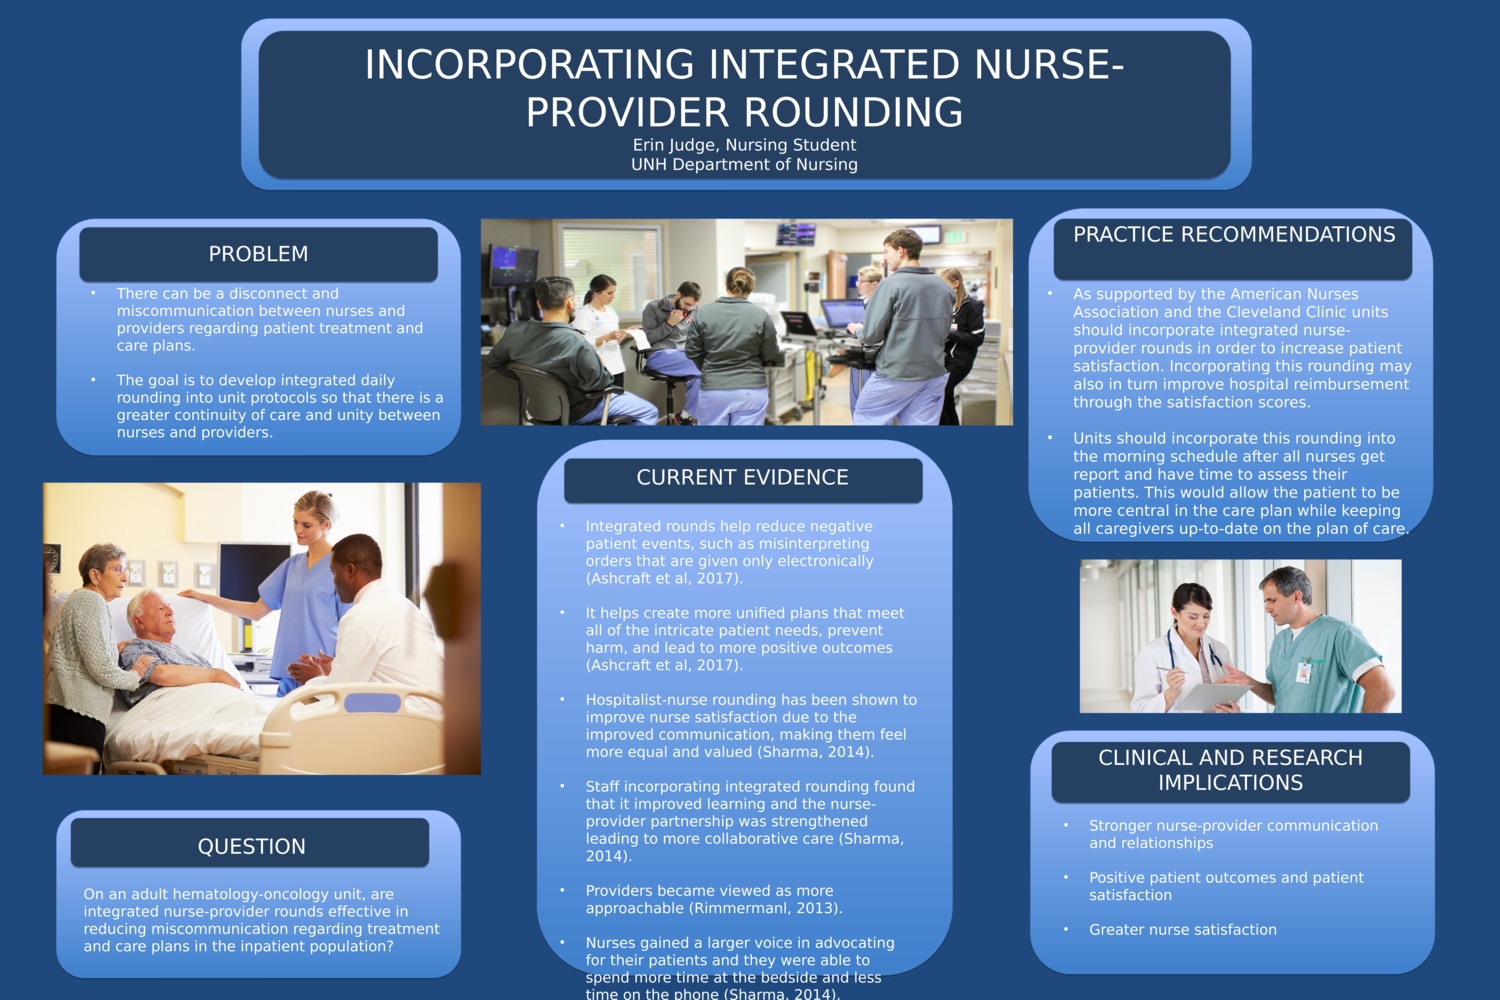 Incorporating Integrated Nurse-Provider Ronding by emj2002